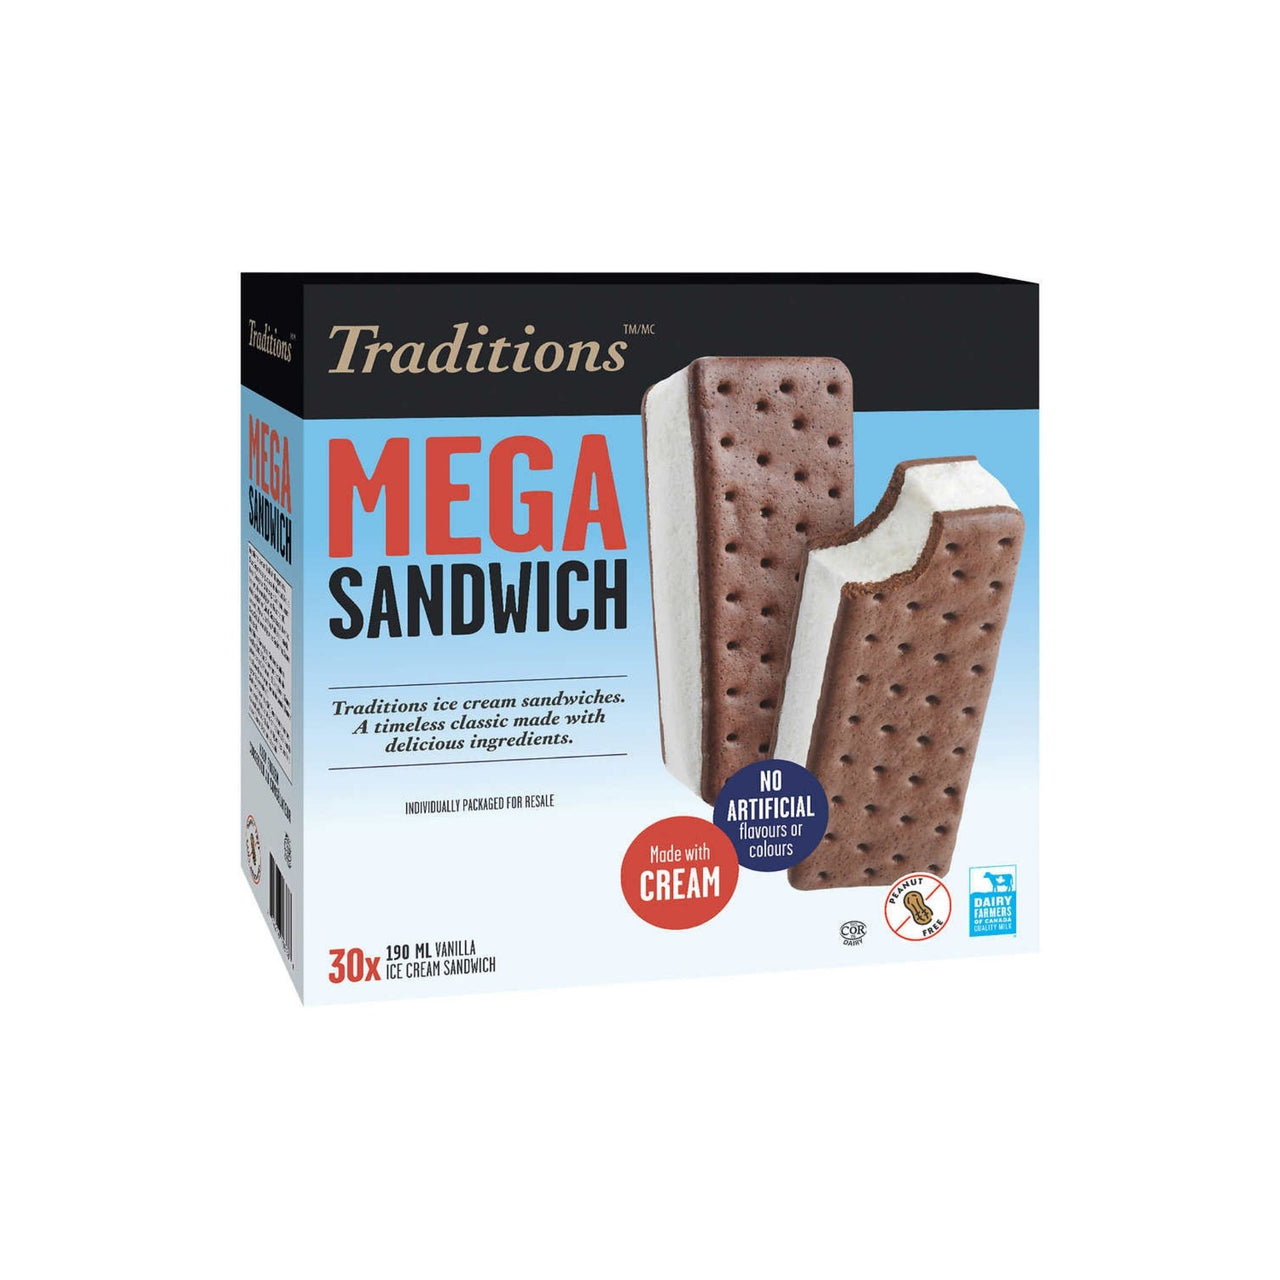 Image of Traditions Mega Sandwich Ice Cream Sandwiches 30x190ml - (ship at your own risk)